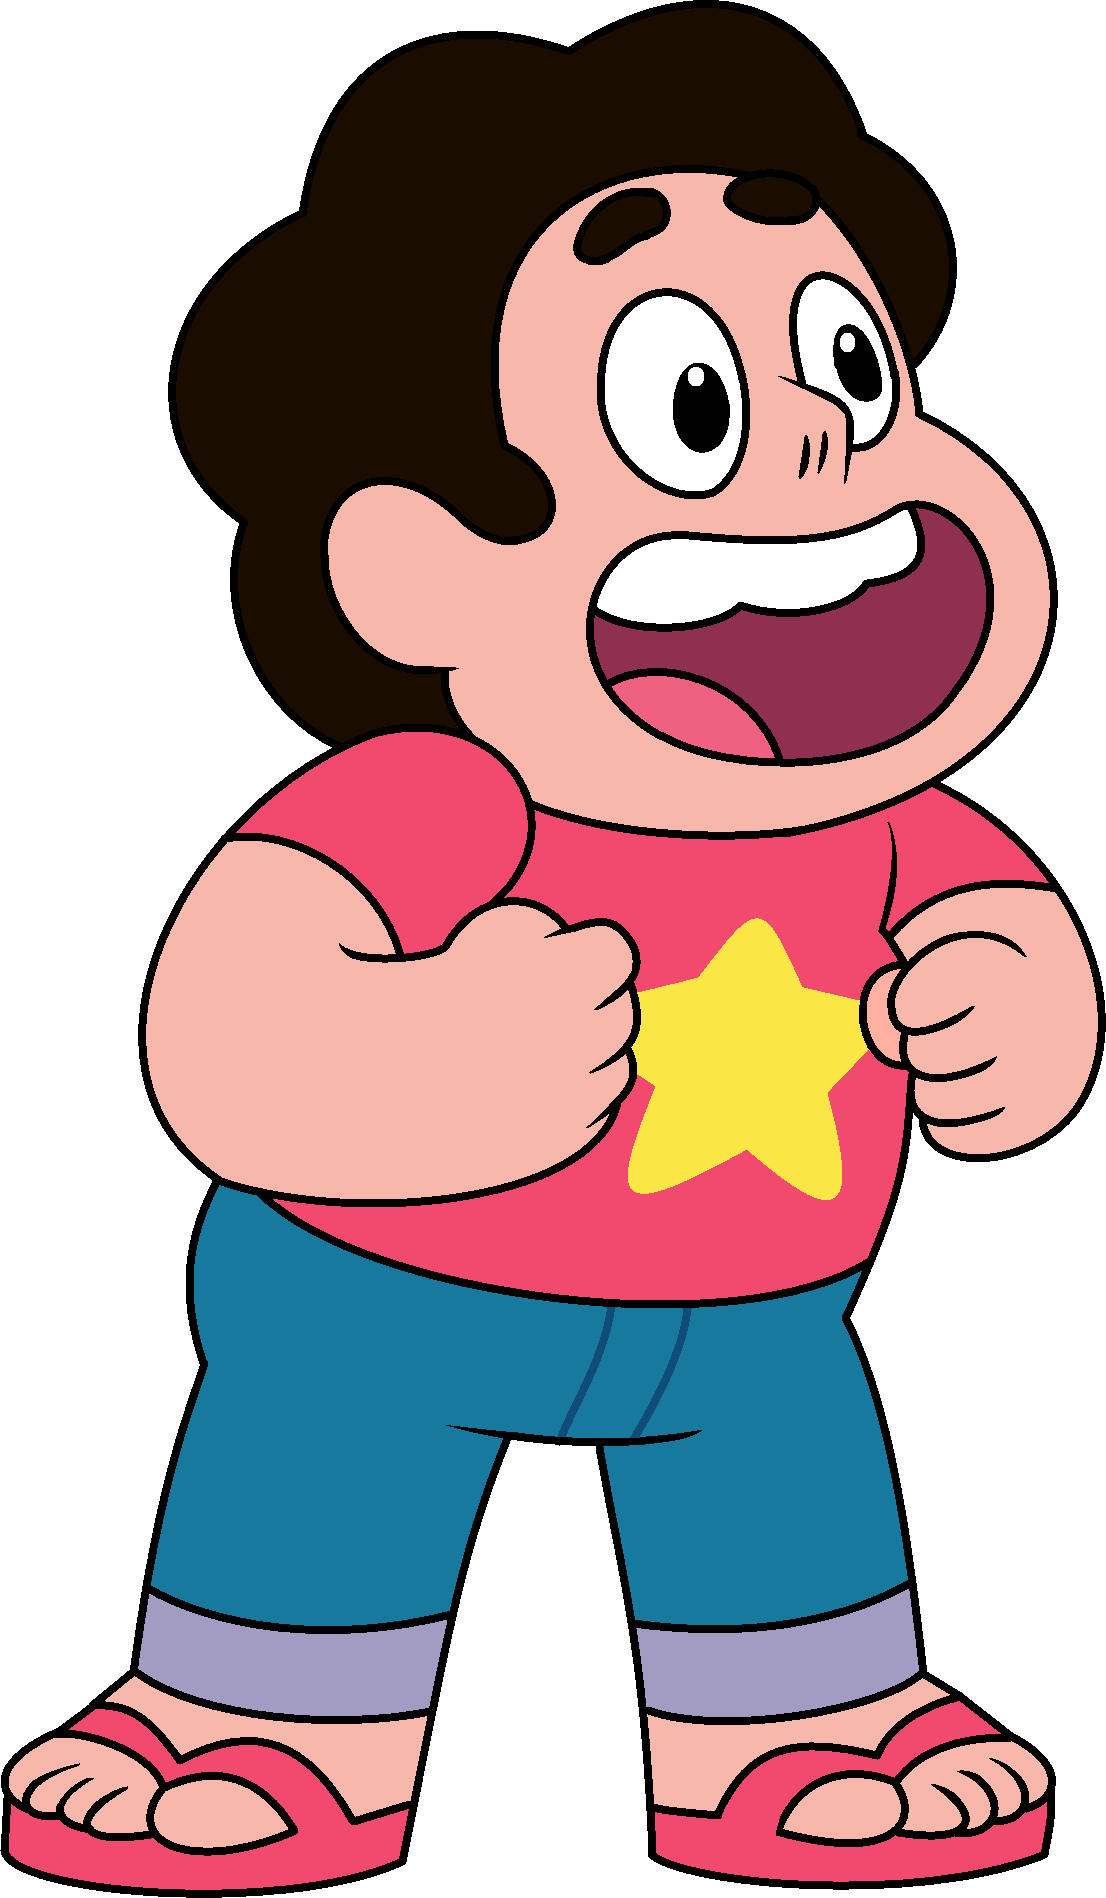 Animated Steven Universe PNG Image